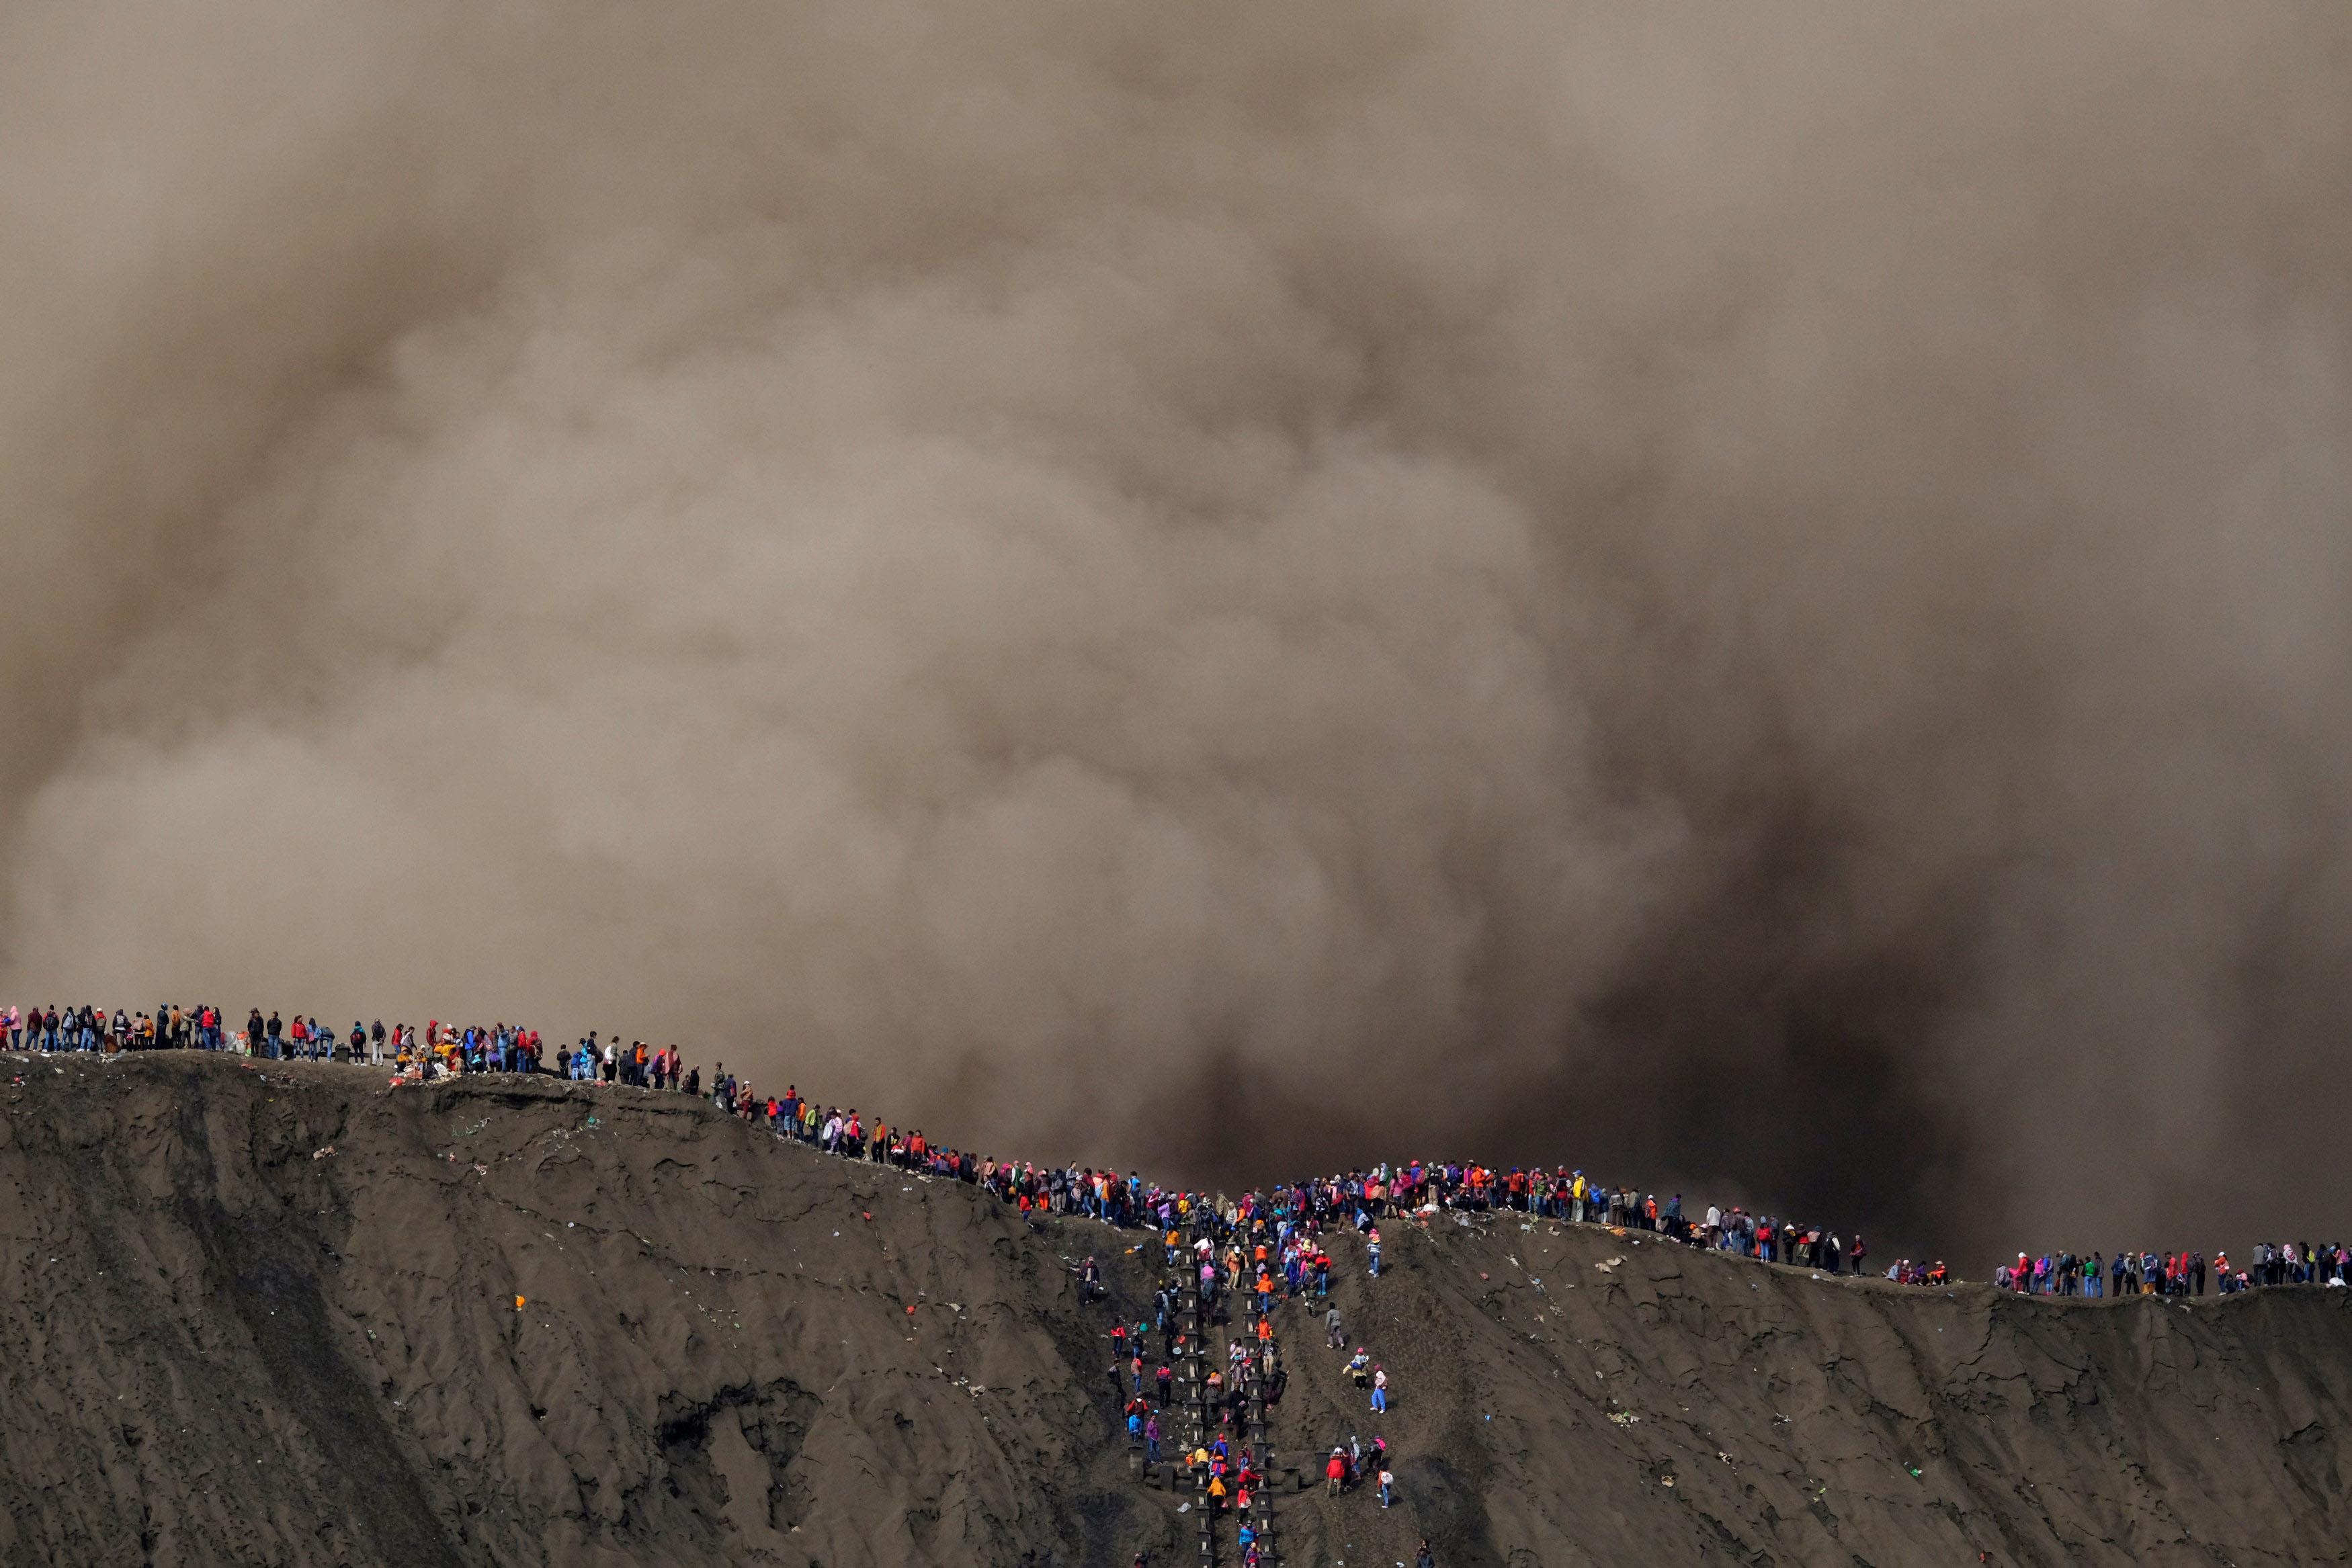 Hindu villagers and visitors stand on the edge of the volcanic crater of Mount Bromo as smoke and as